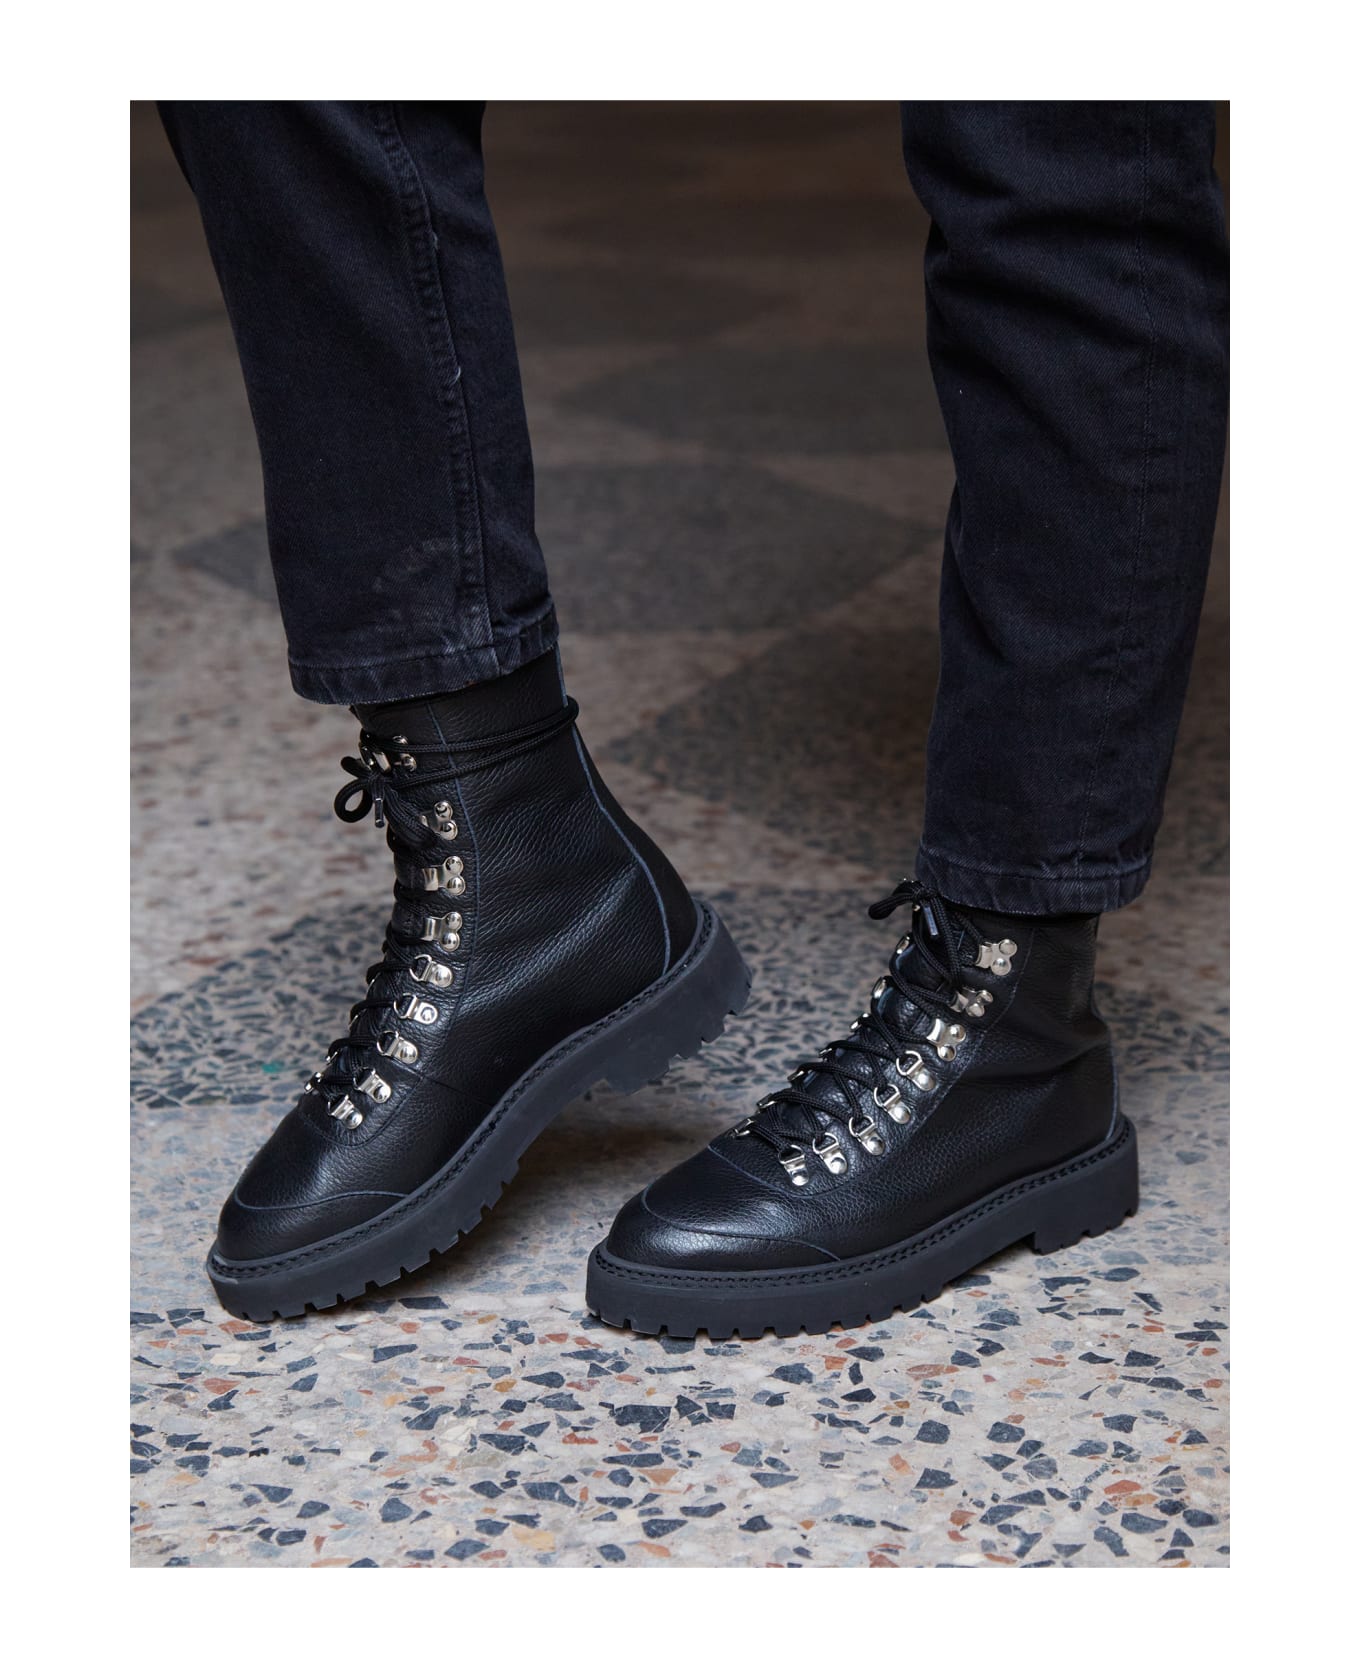 CB Made in Italy Tumbled Leather Boots Sirio - Black ブーツ